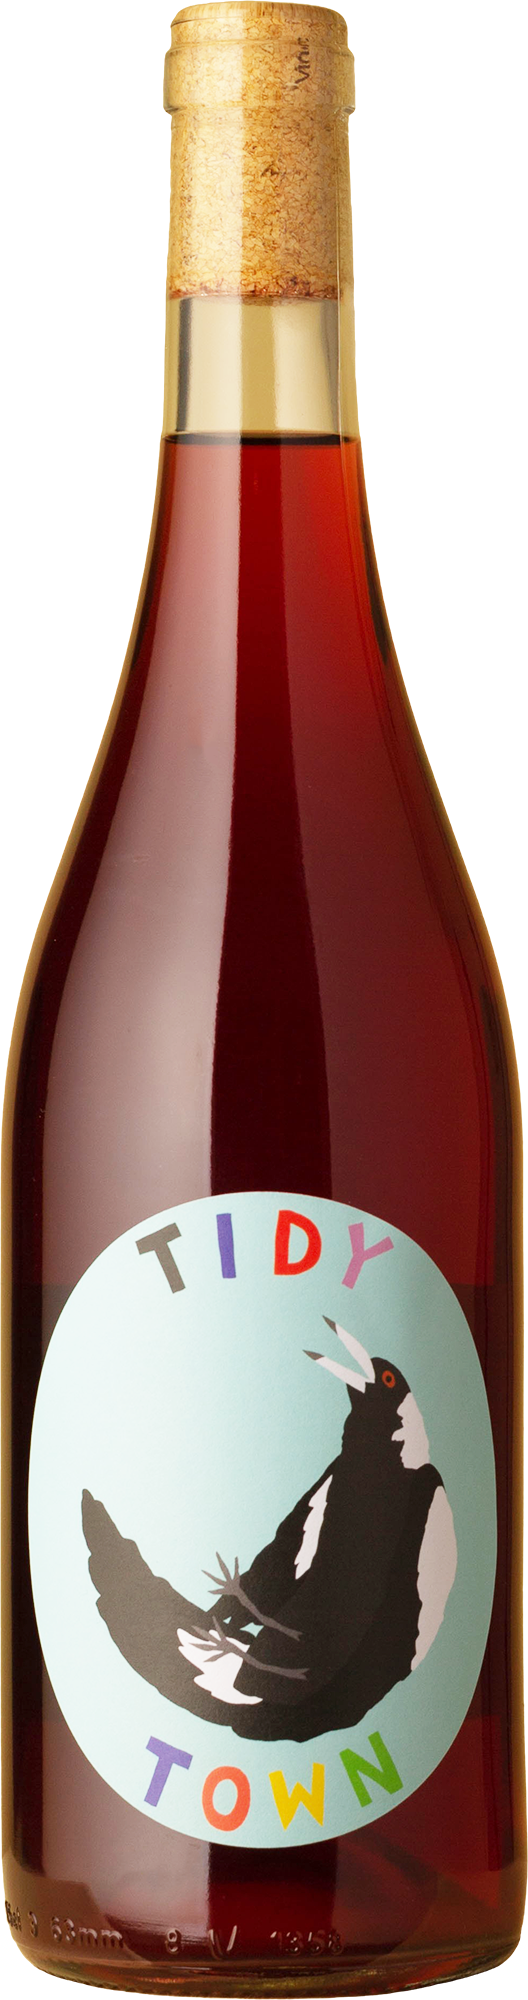 Tidy Town - Chilled Red Lambrusco Maestri 2022 Red Wine